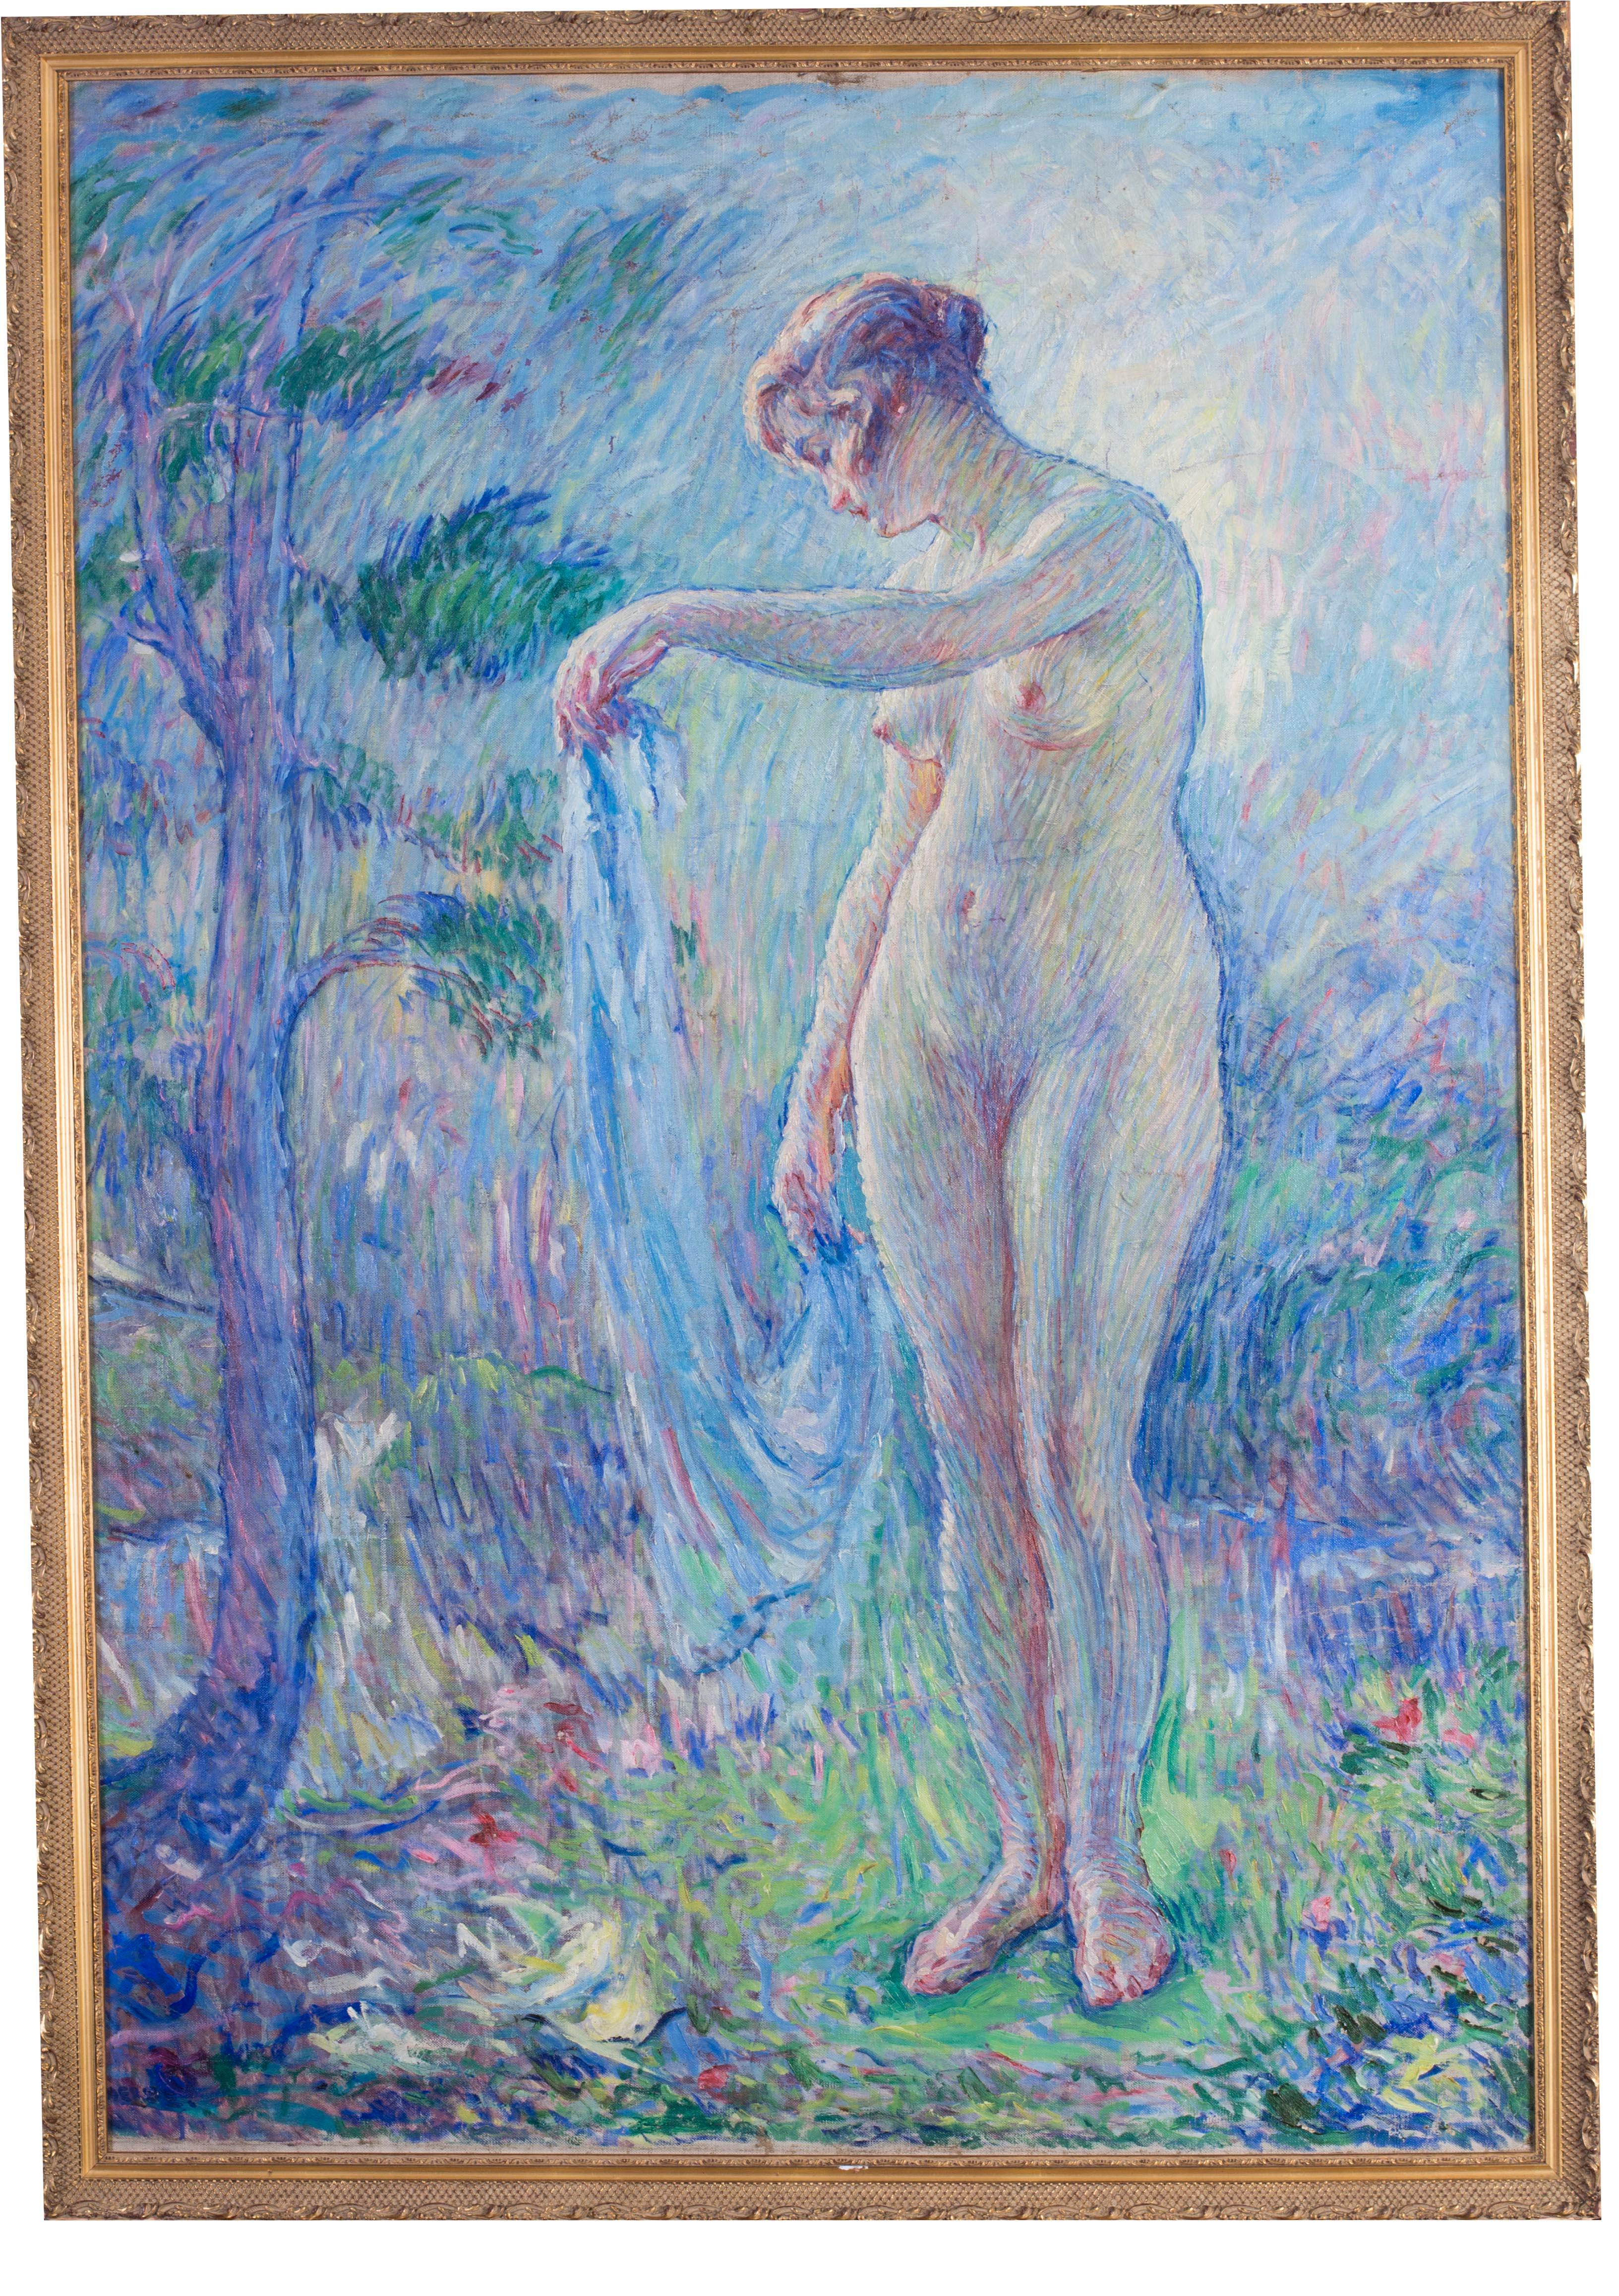 Large French Post Impressionist painting of a nude with blue tones by Malherbe